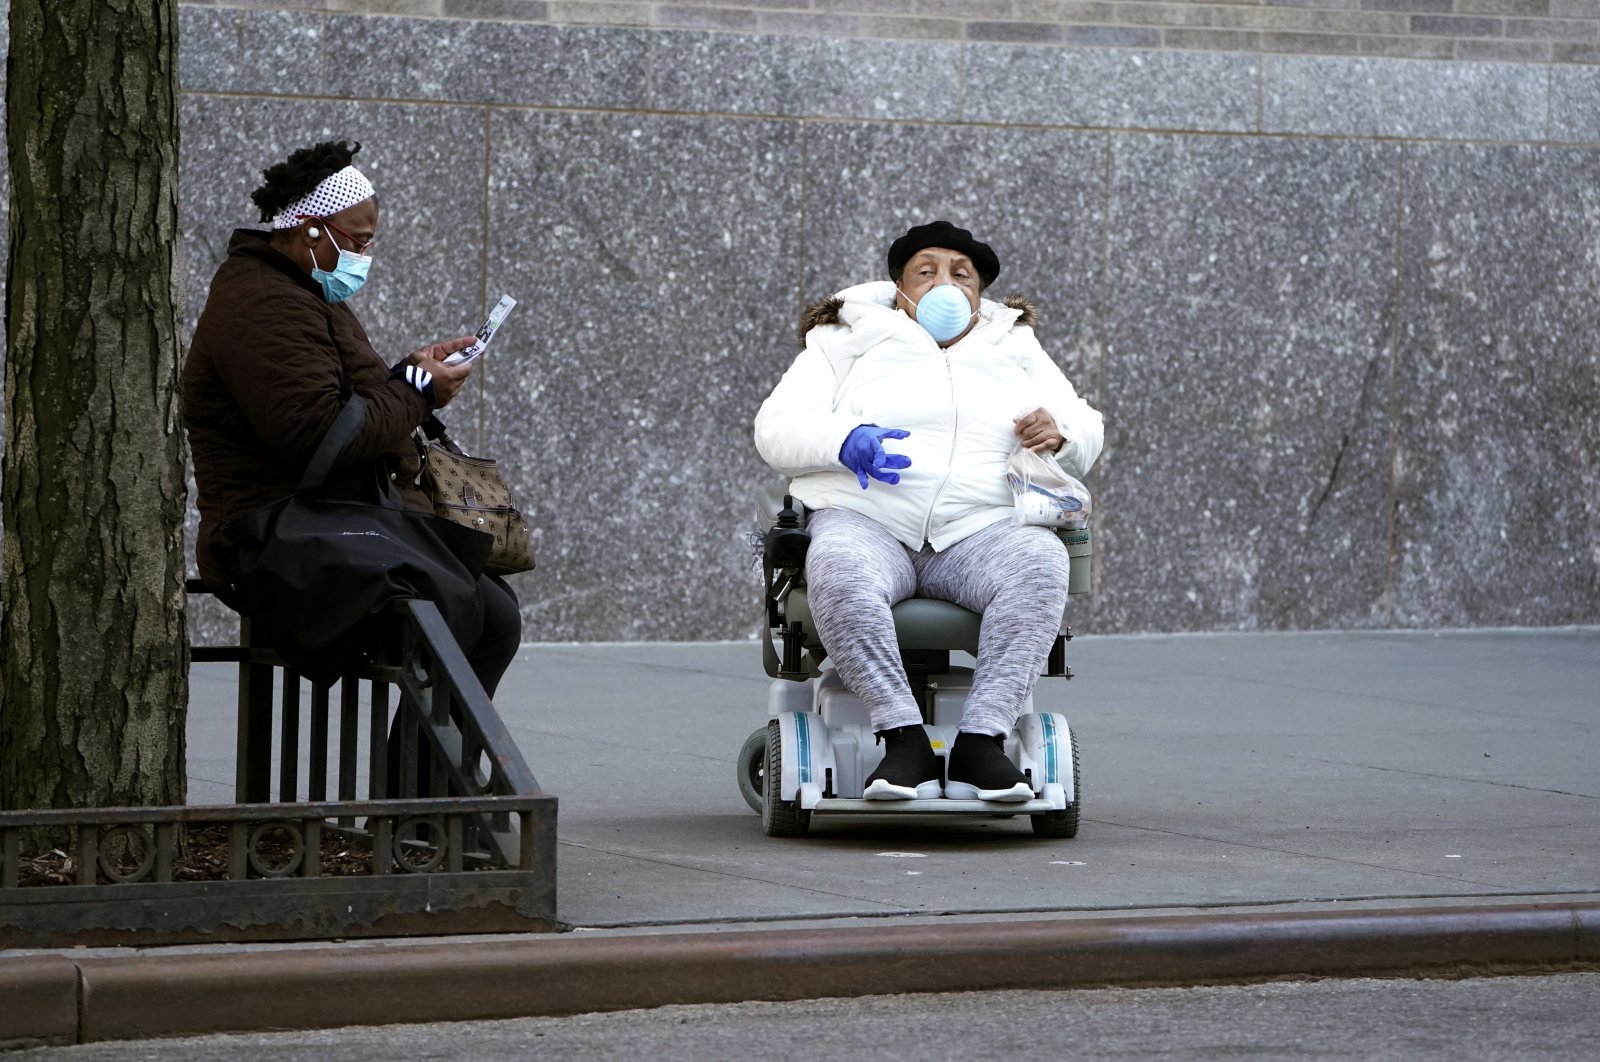 People sit outside a hospital during the outbreak of coronavirus disease, in the Manhattan borough of New York City, New York, U.S., Friday, March 27, 2020. (REUTERS Photo)